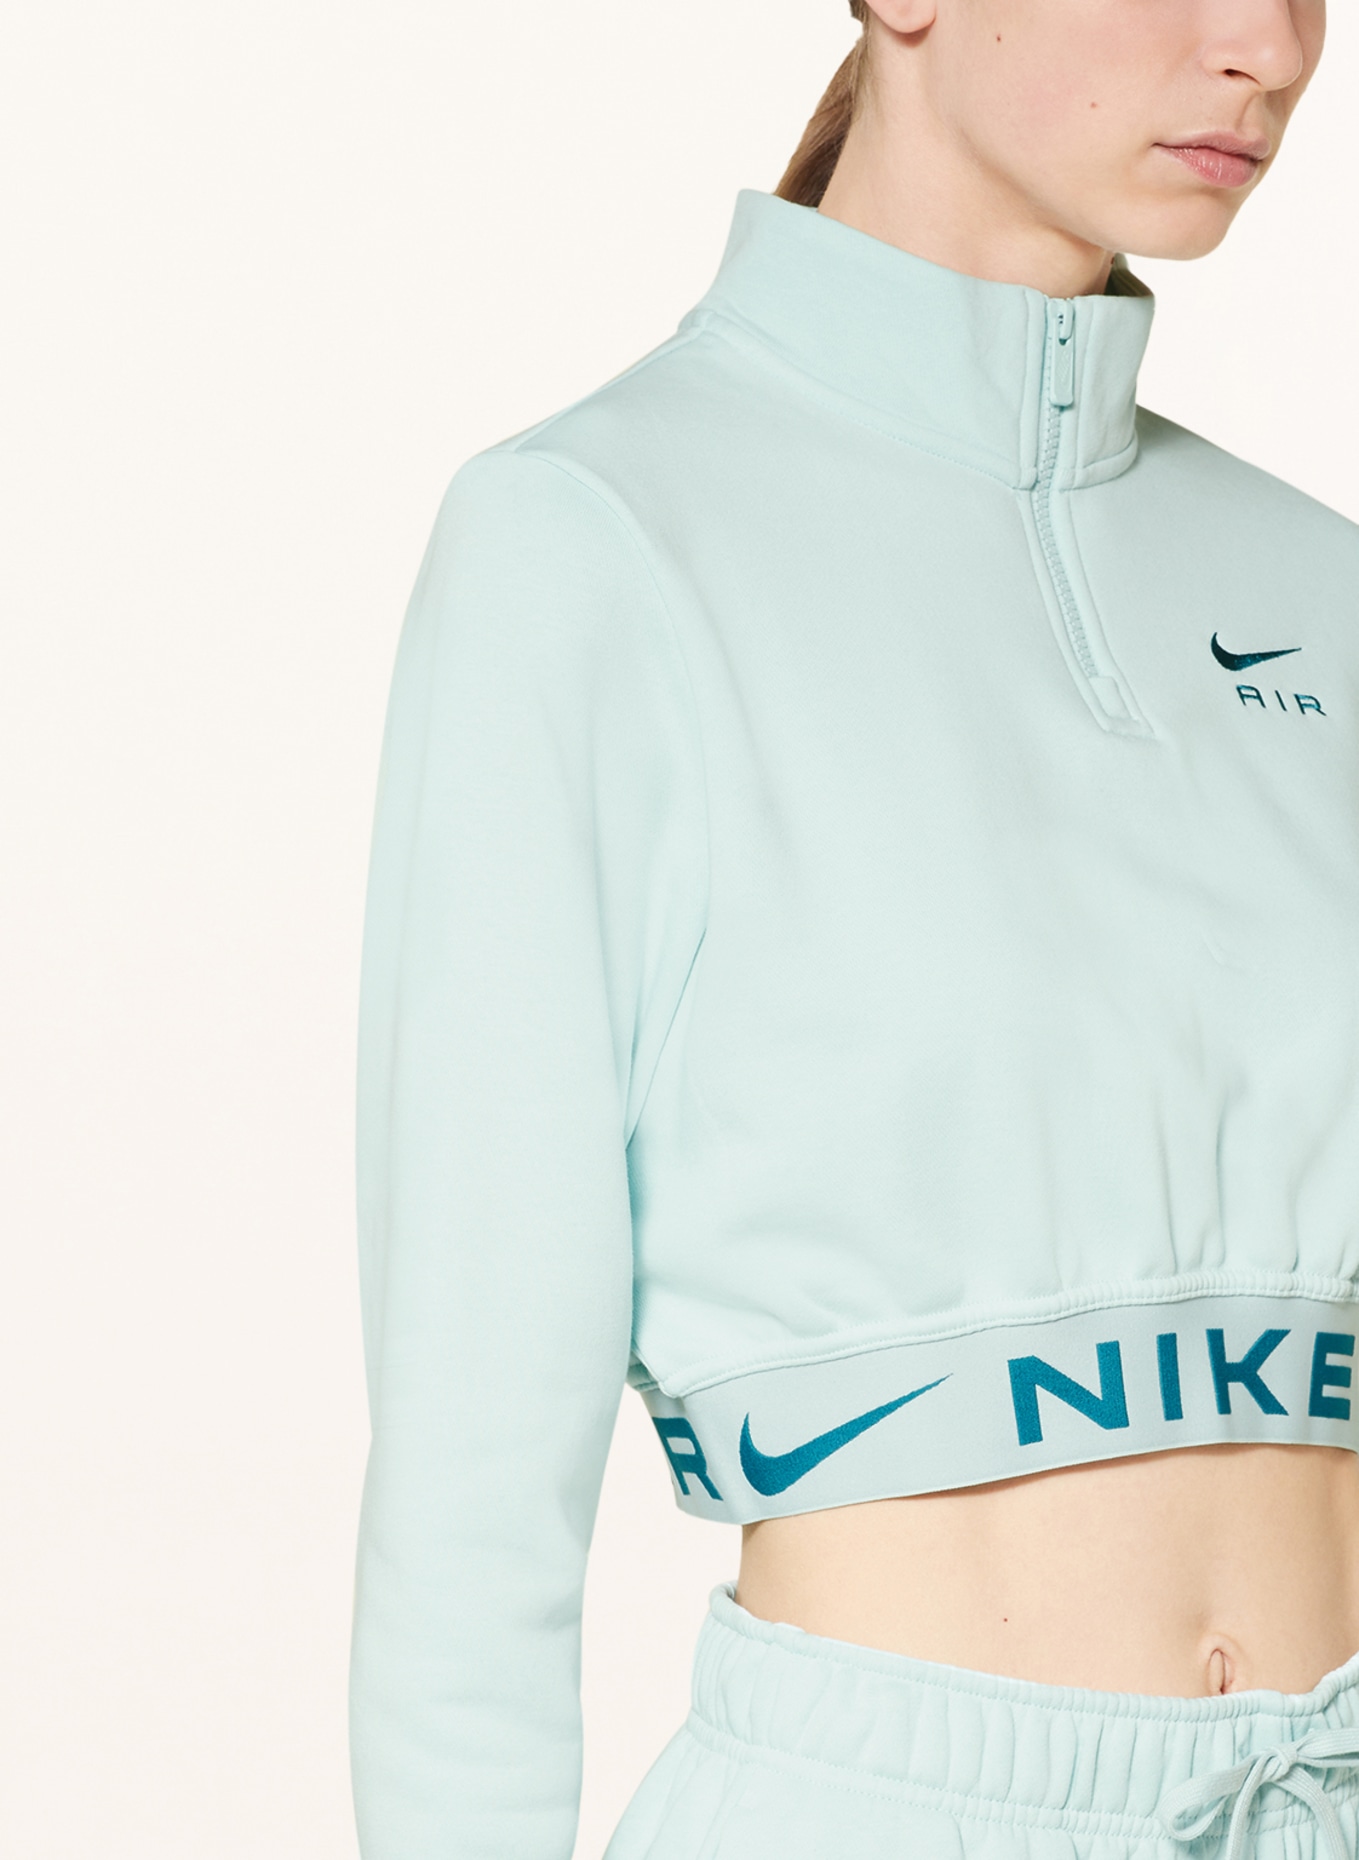 Nike Cropped half-zip sweater EXERCISE AIR made of sweatshirt fabric, Color: MINT (Image 4)